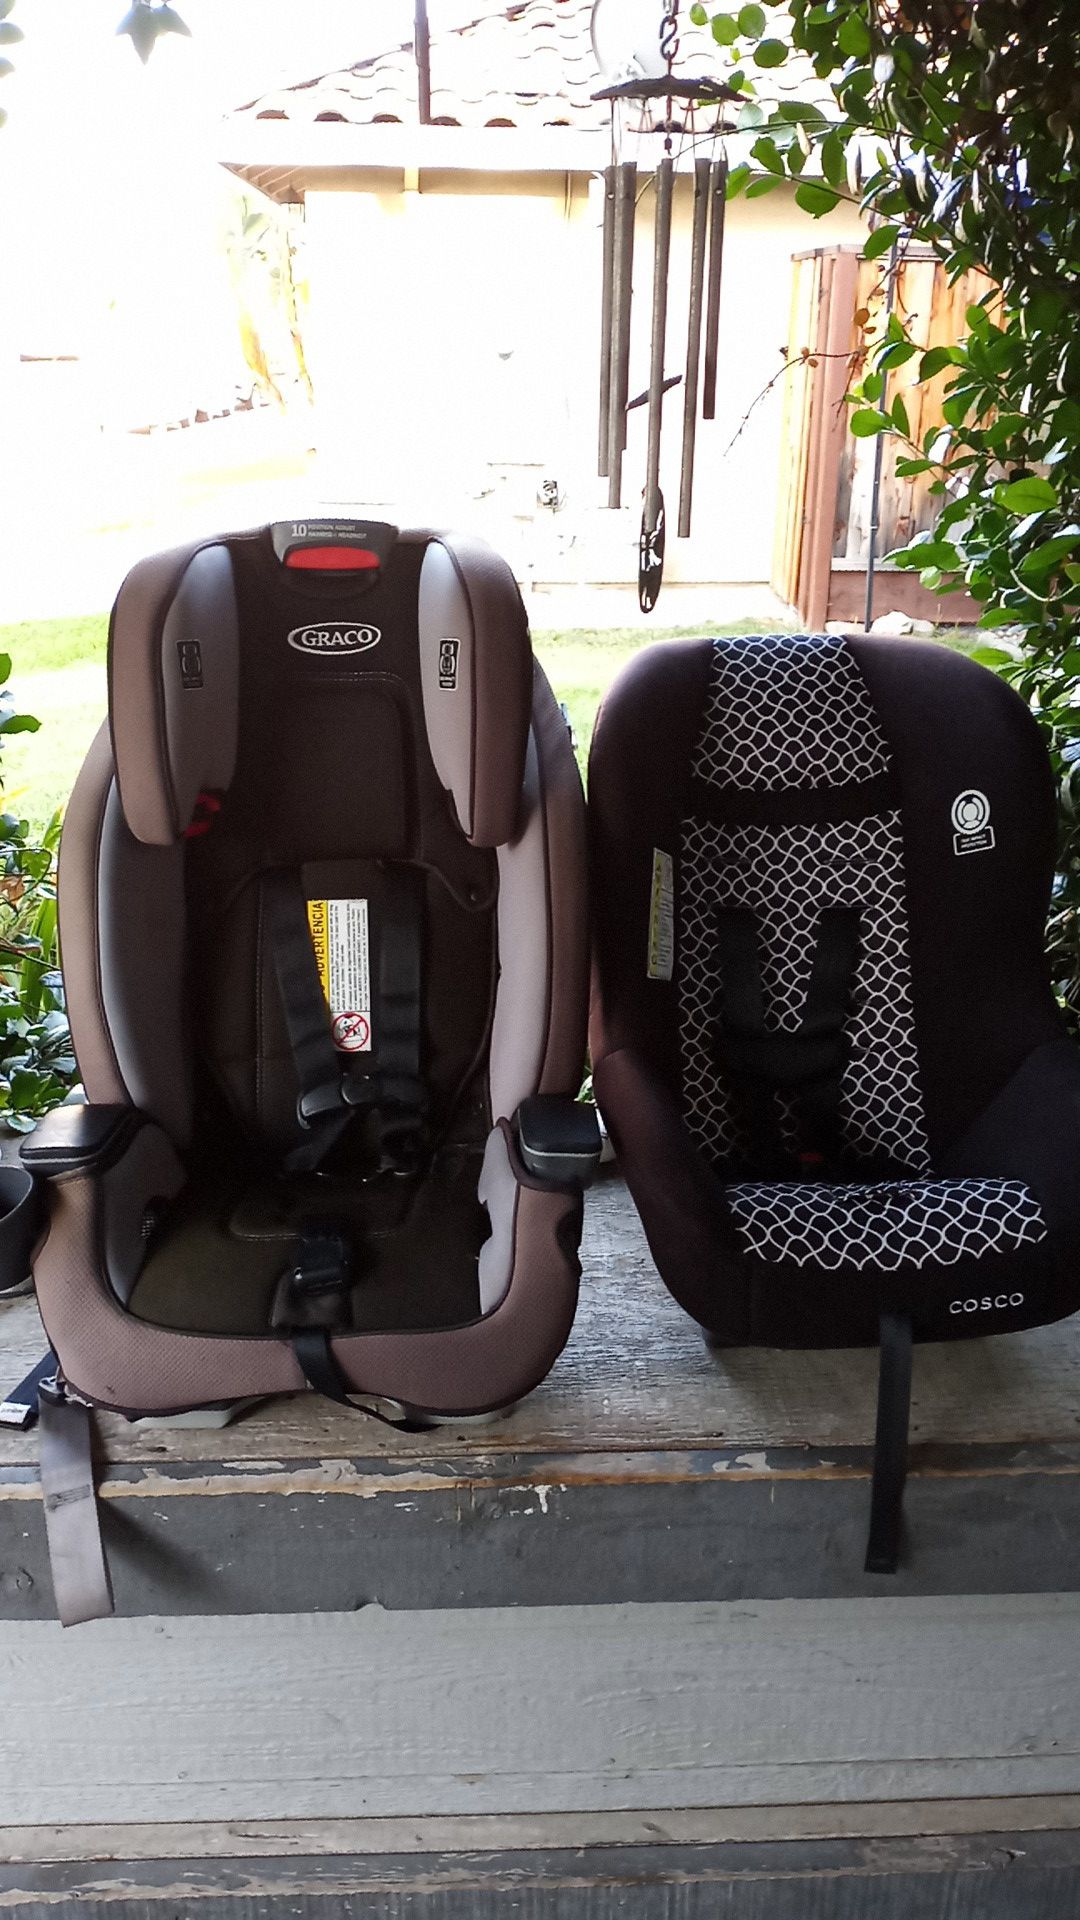 Two car seats 1 Graco and one Costco